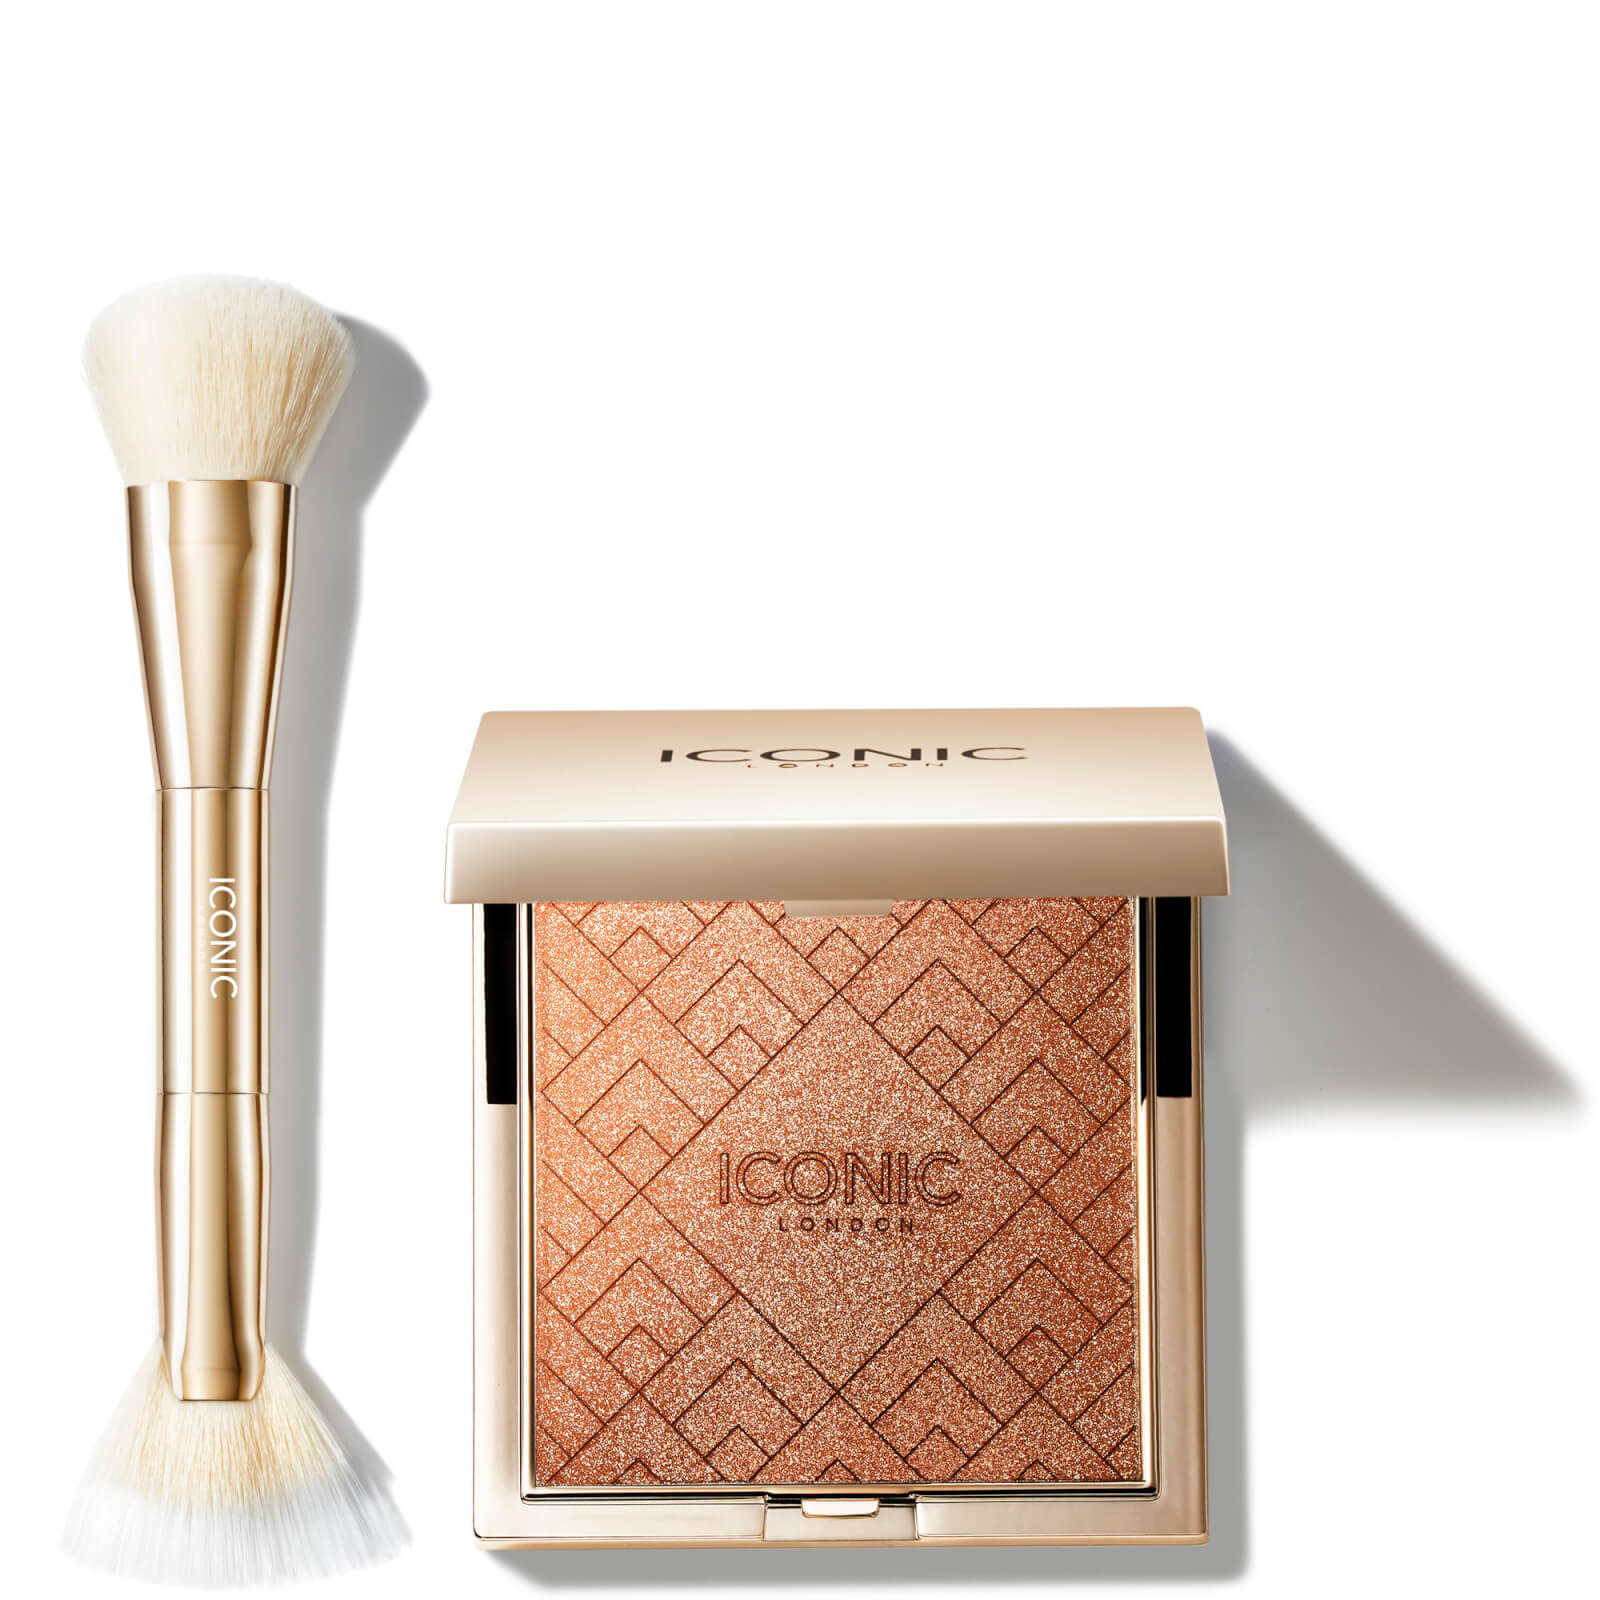 Iconic London Kissed By The Sun Multi-use Cheek Glow And Brush (various Shades) - Date Night In White